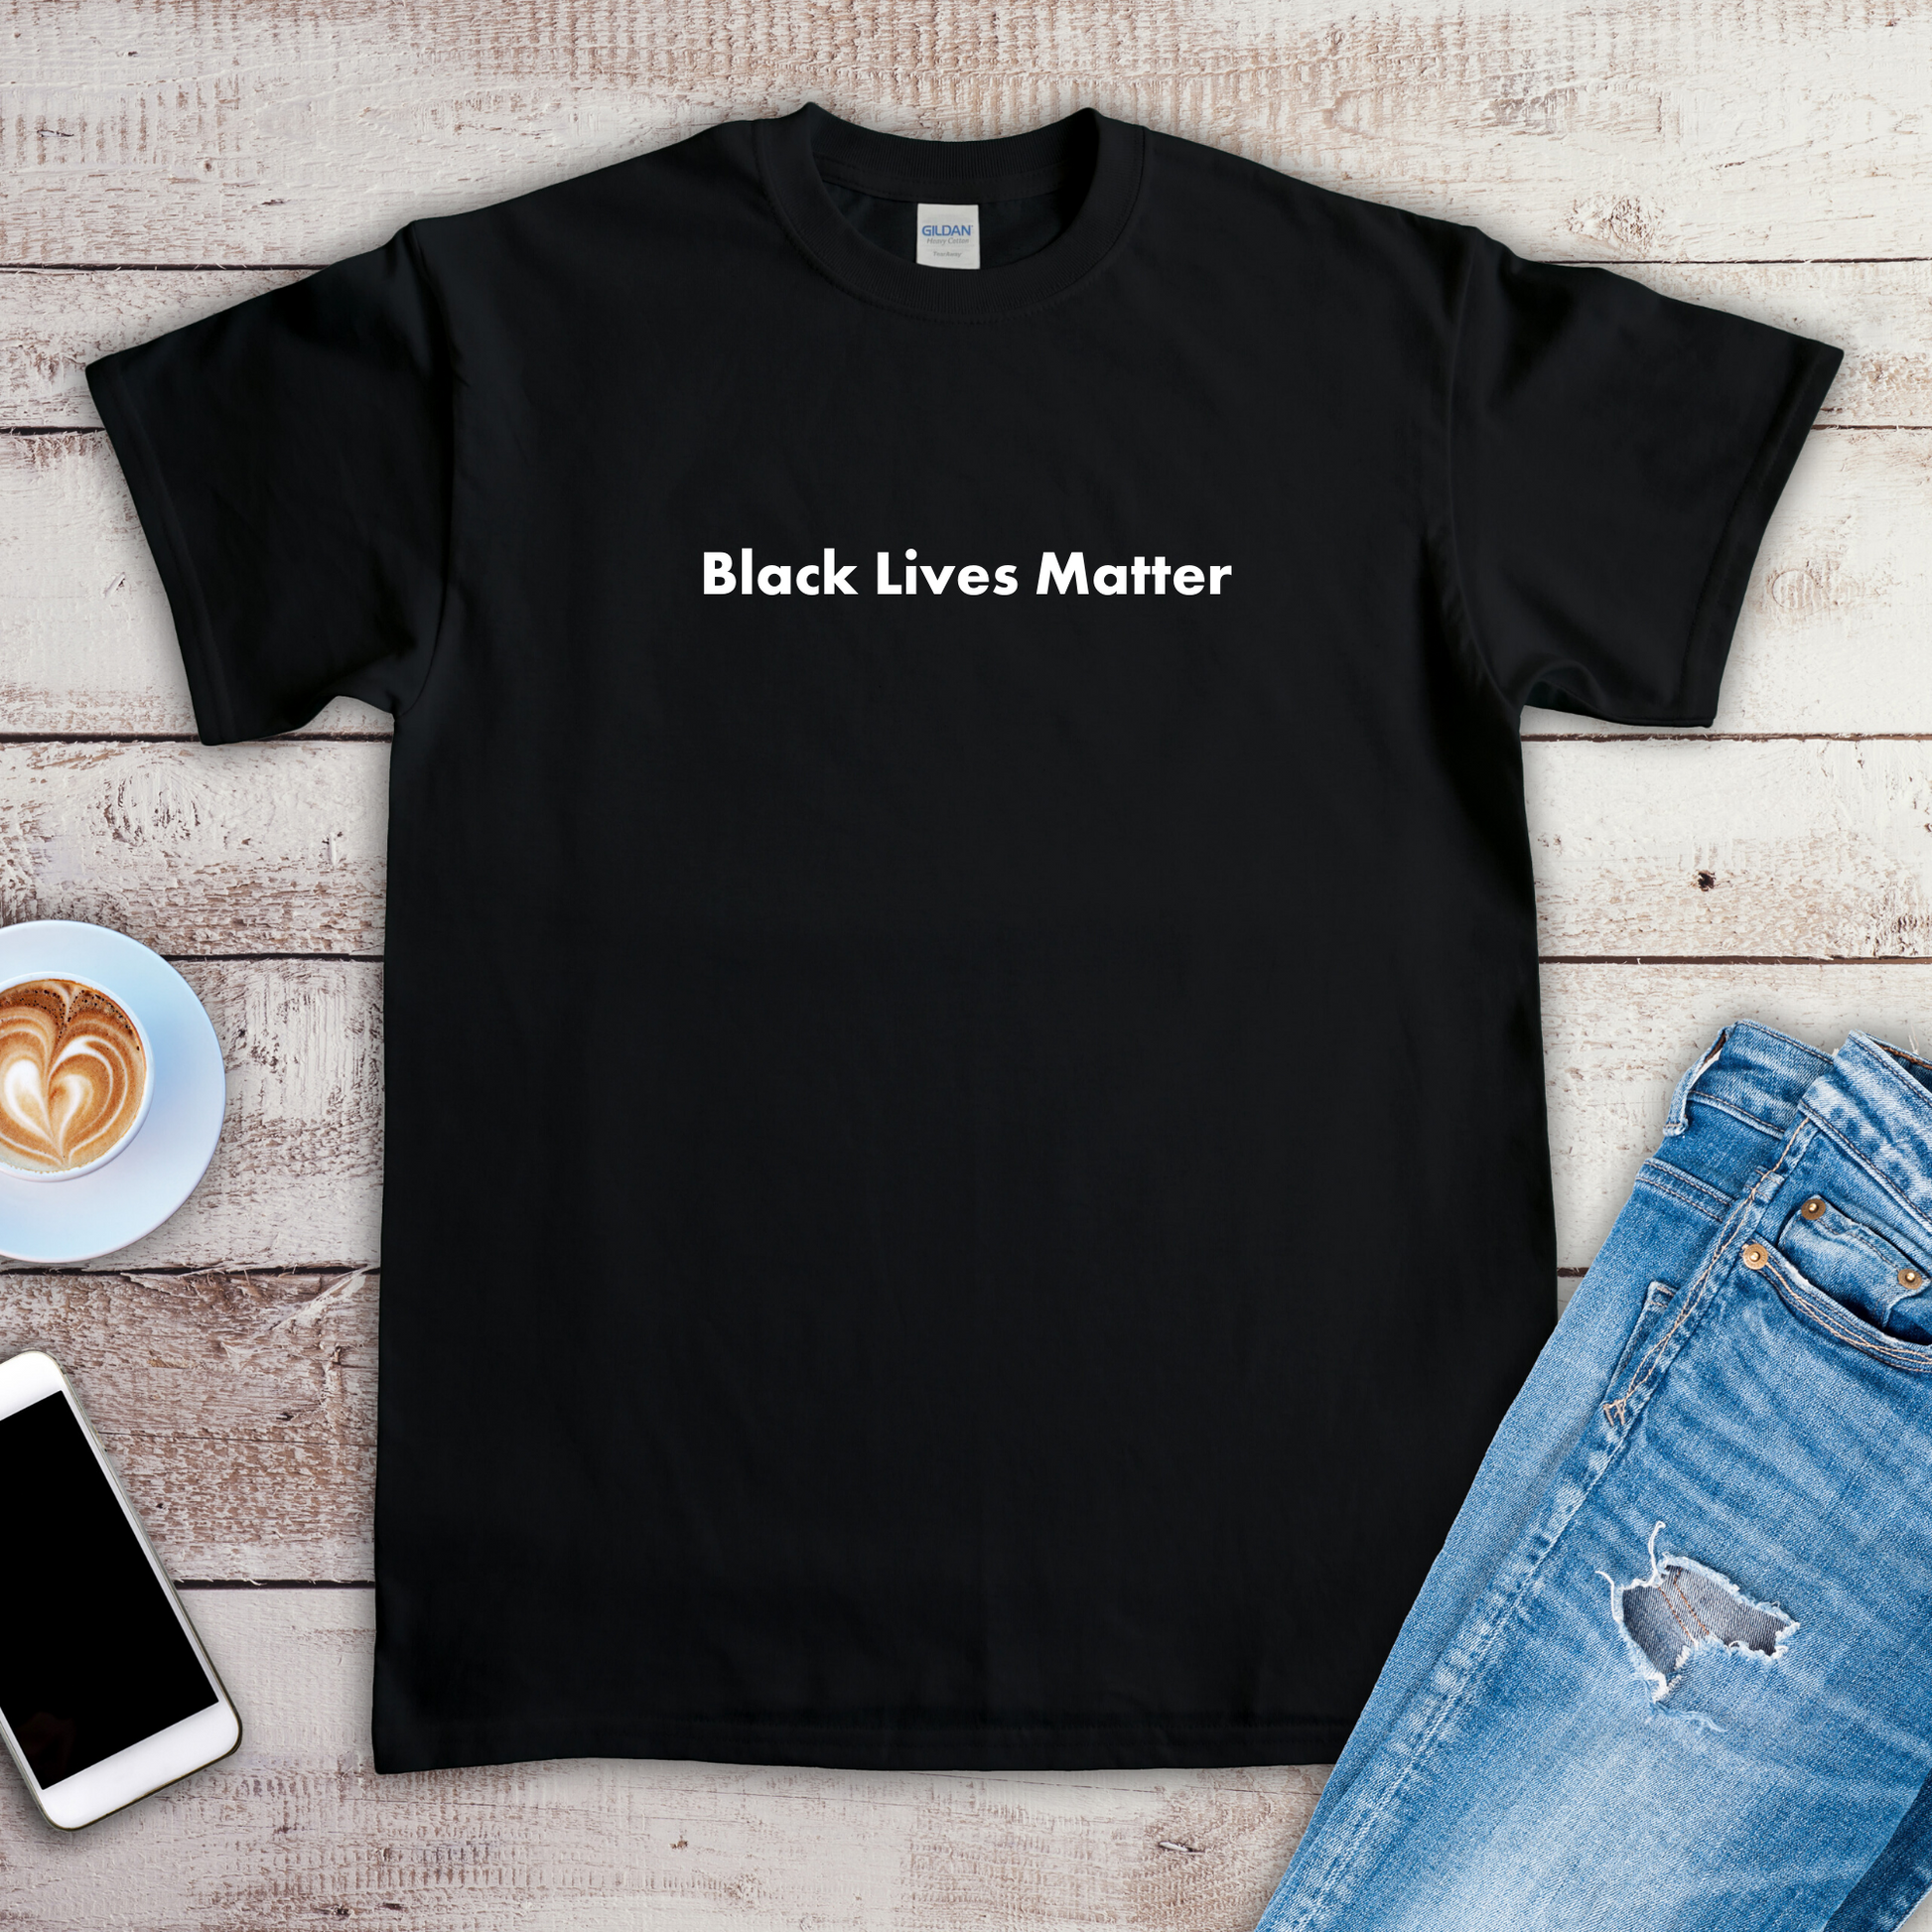 A black t-shirt is laying on a wooden floor. The t-shirt has a statement on it that says "Black lives matter". There are a pair of jeans, a phone, and a cup of coffee next to the t-shirt.